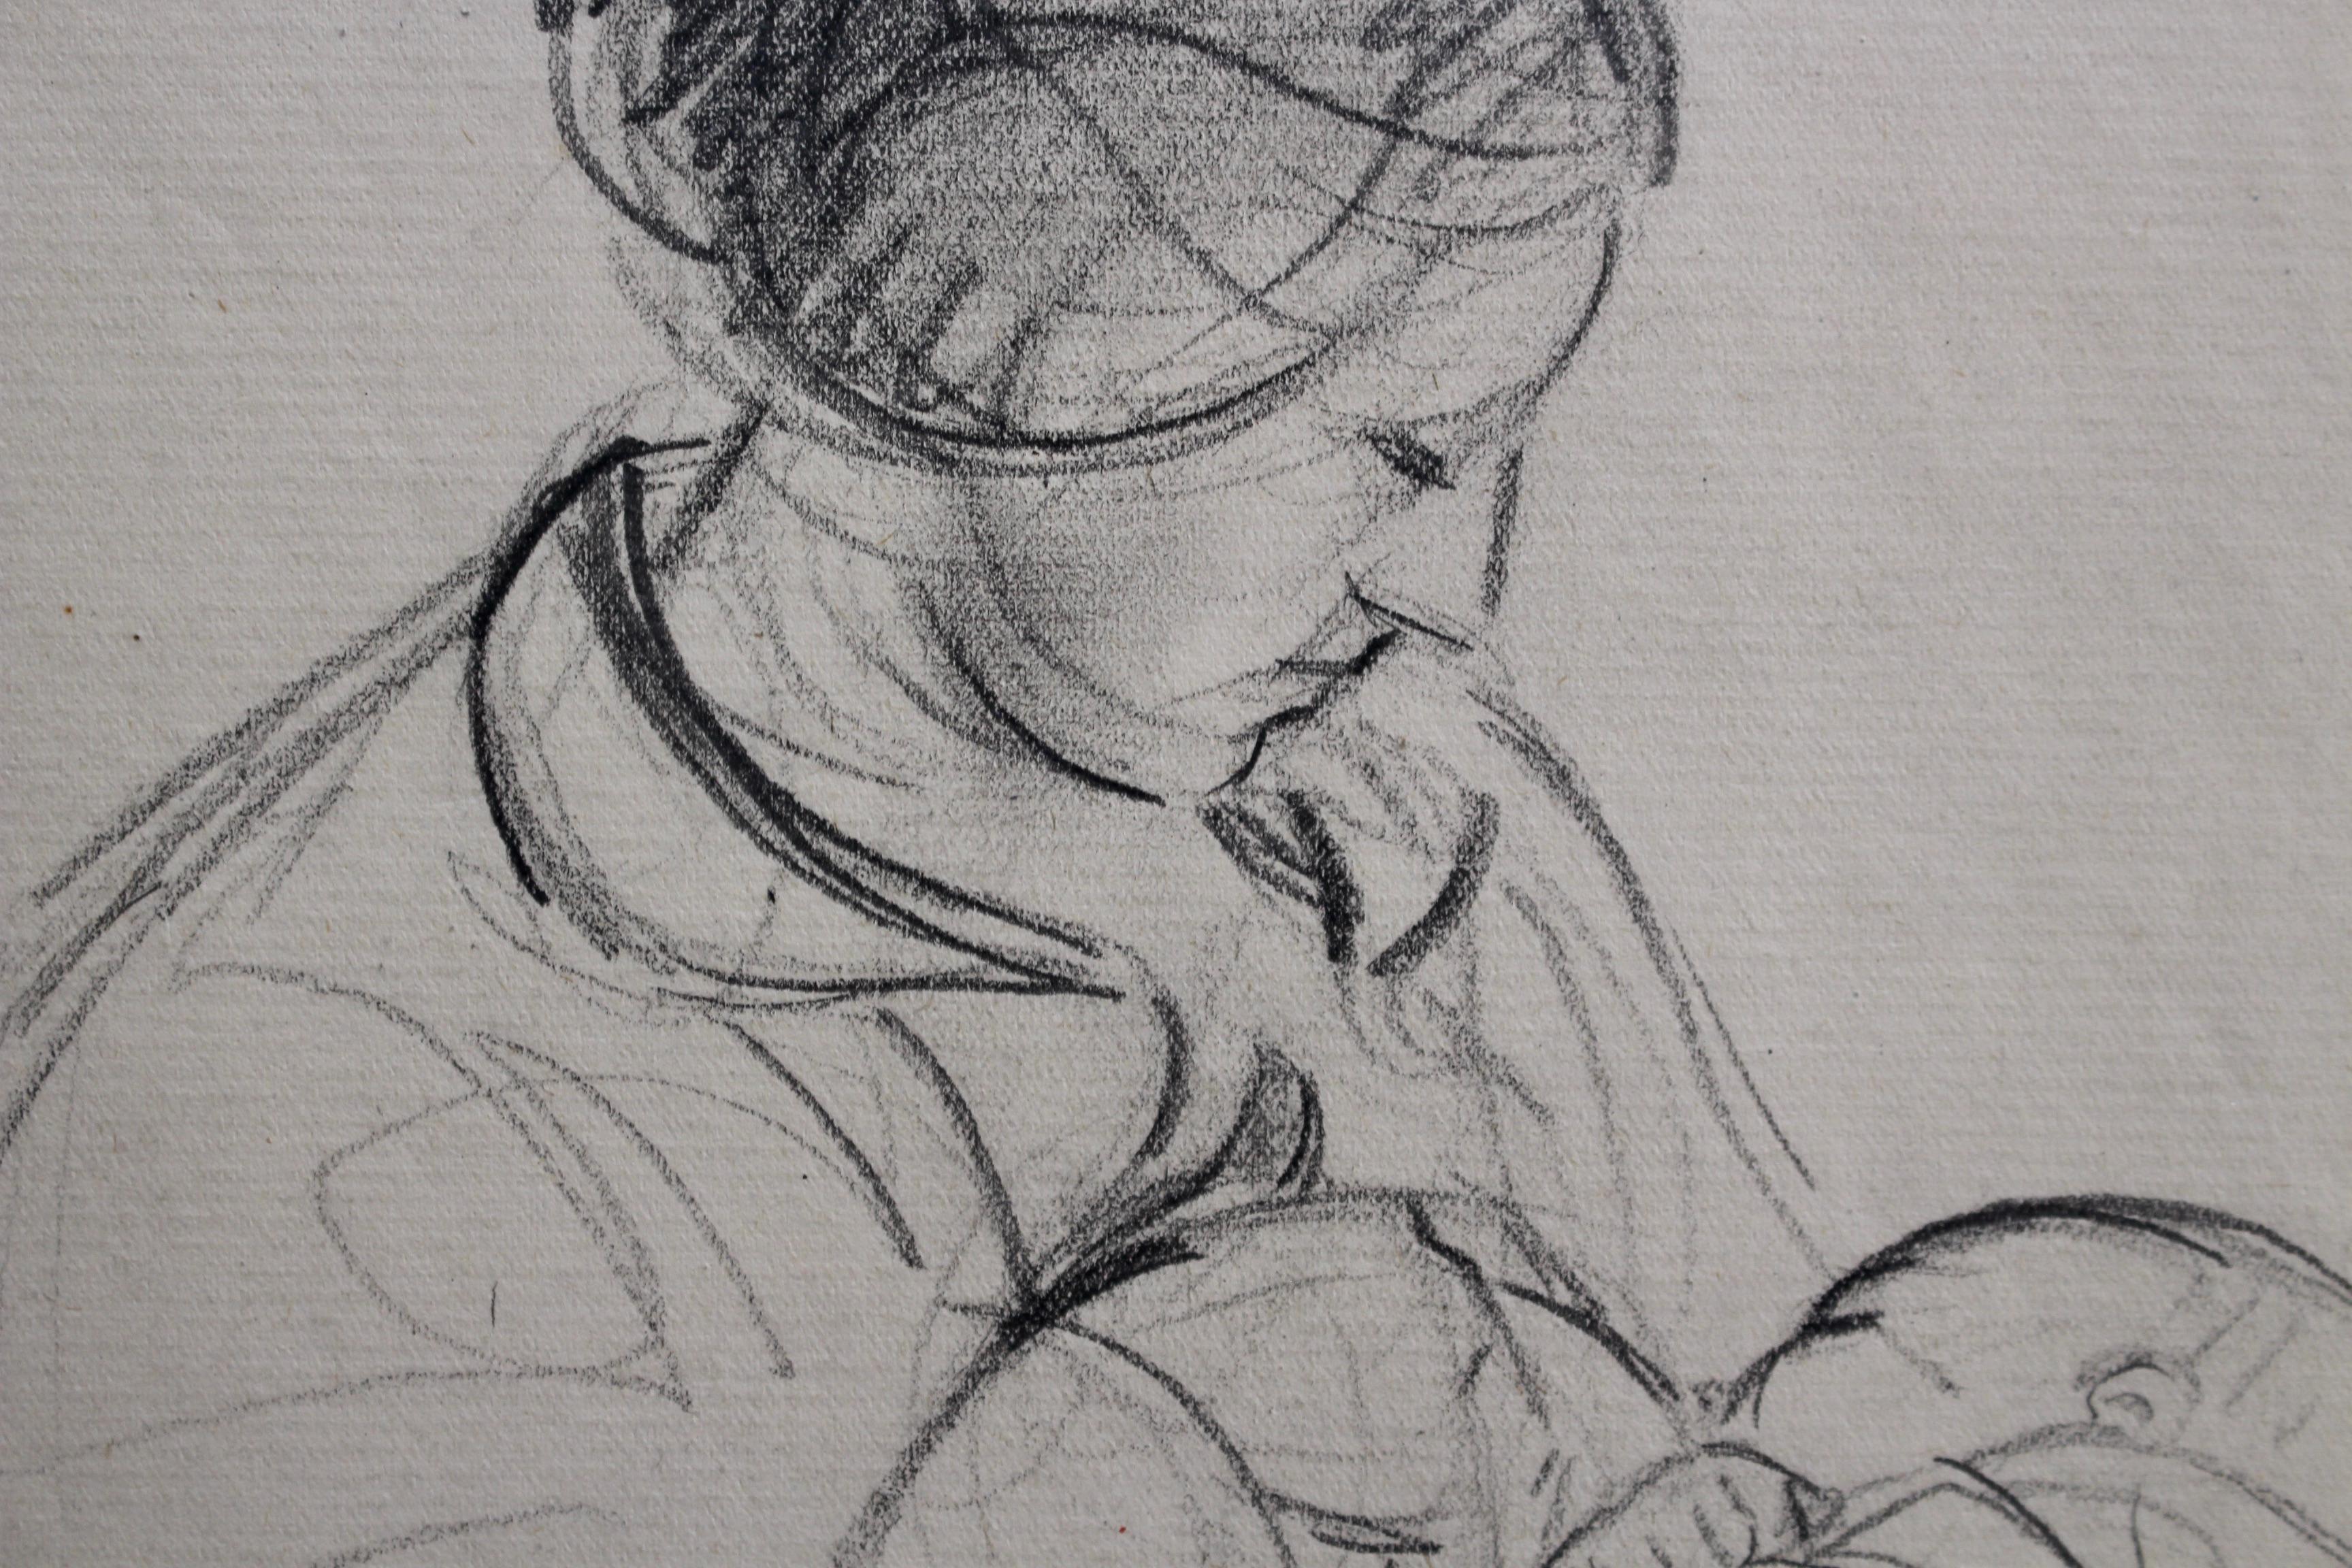 'Mother Nursing Her Baby', pencil on art paper, by French artist, Guillaume Dulac (circa 1920s). An artist known for his exquisite drawings - many are sketches for his larger oil paintings or other works, this piece's beauty lies once again in its